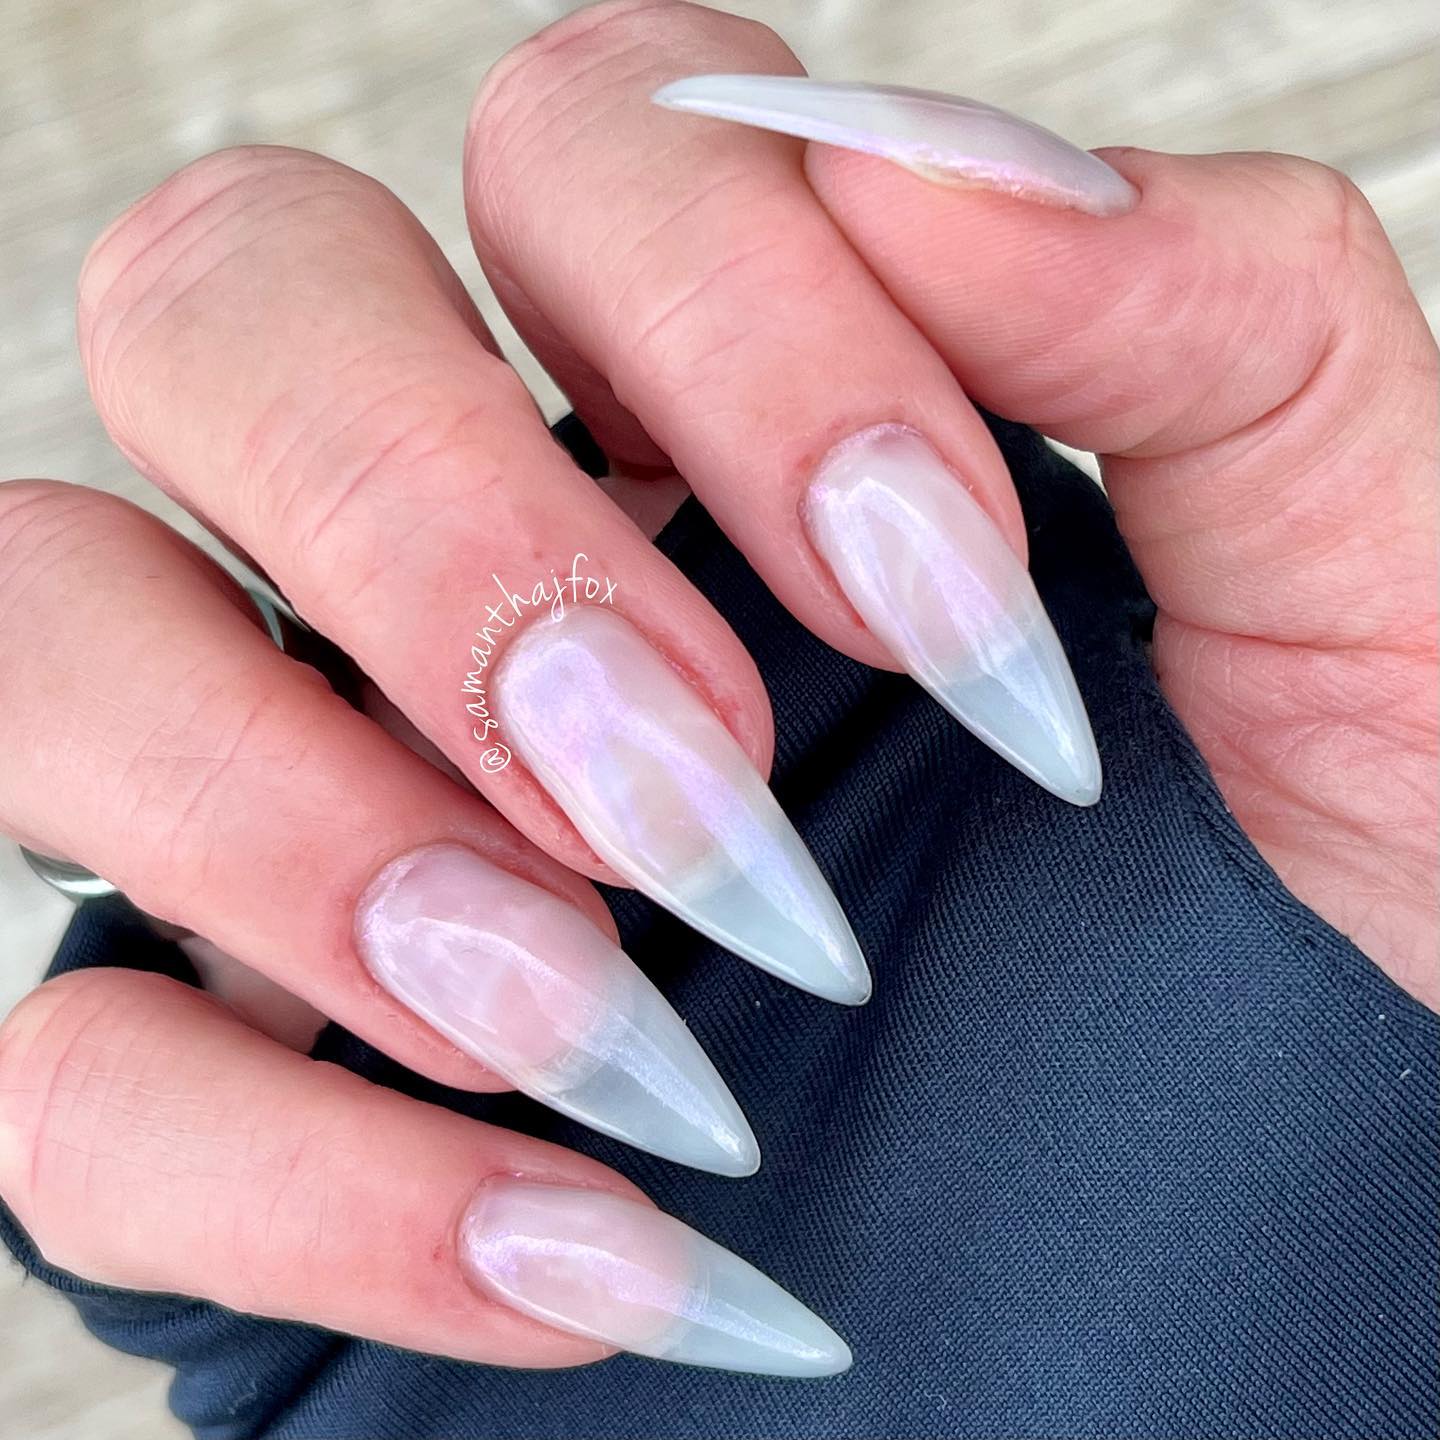 This transparent nail design is for those who like to look simple but chic at the same time. It won't take too much time to get these nails.